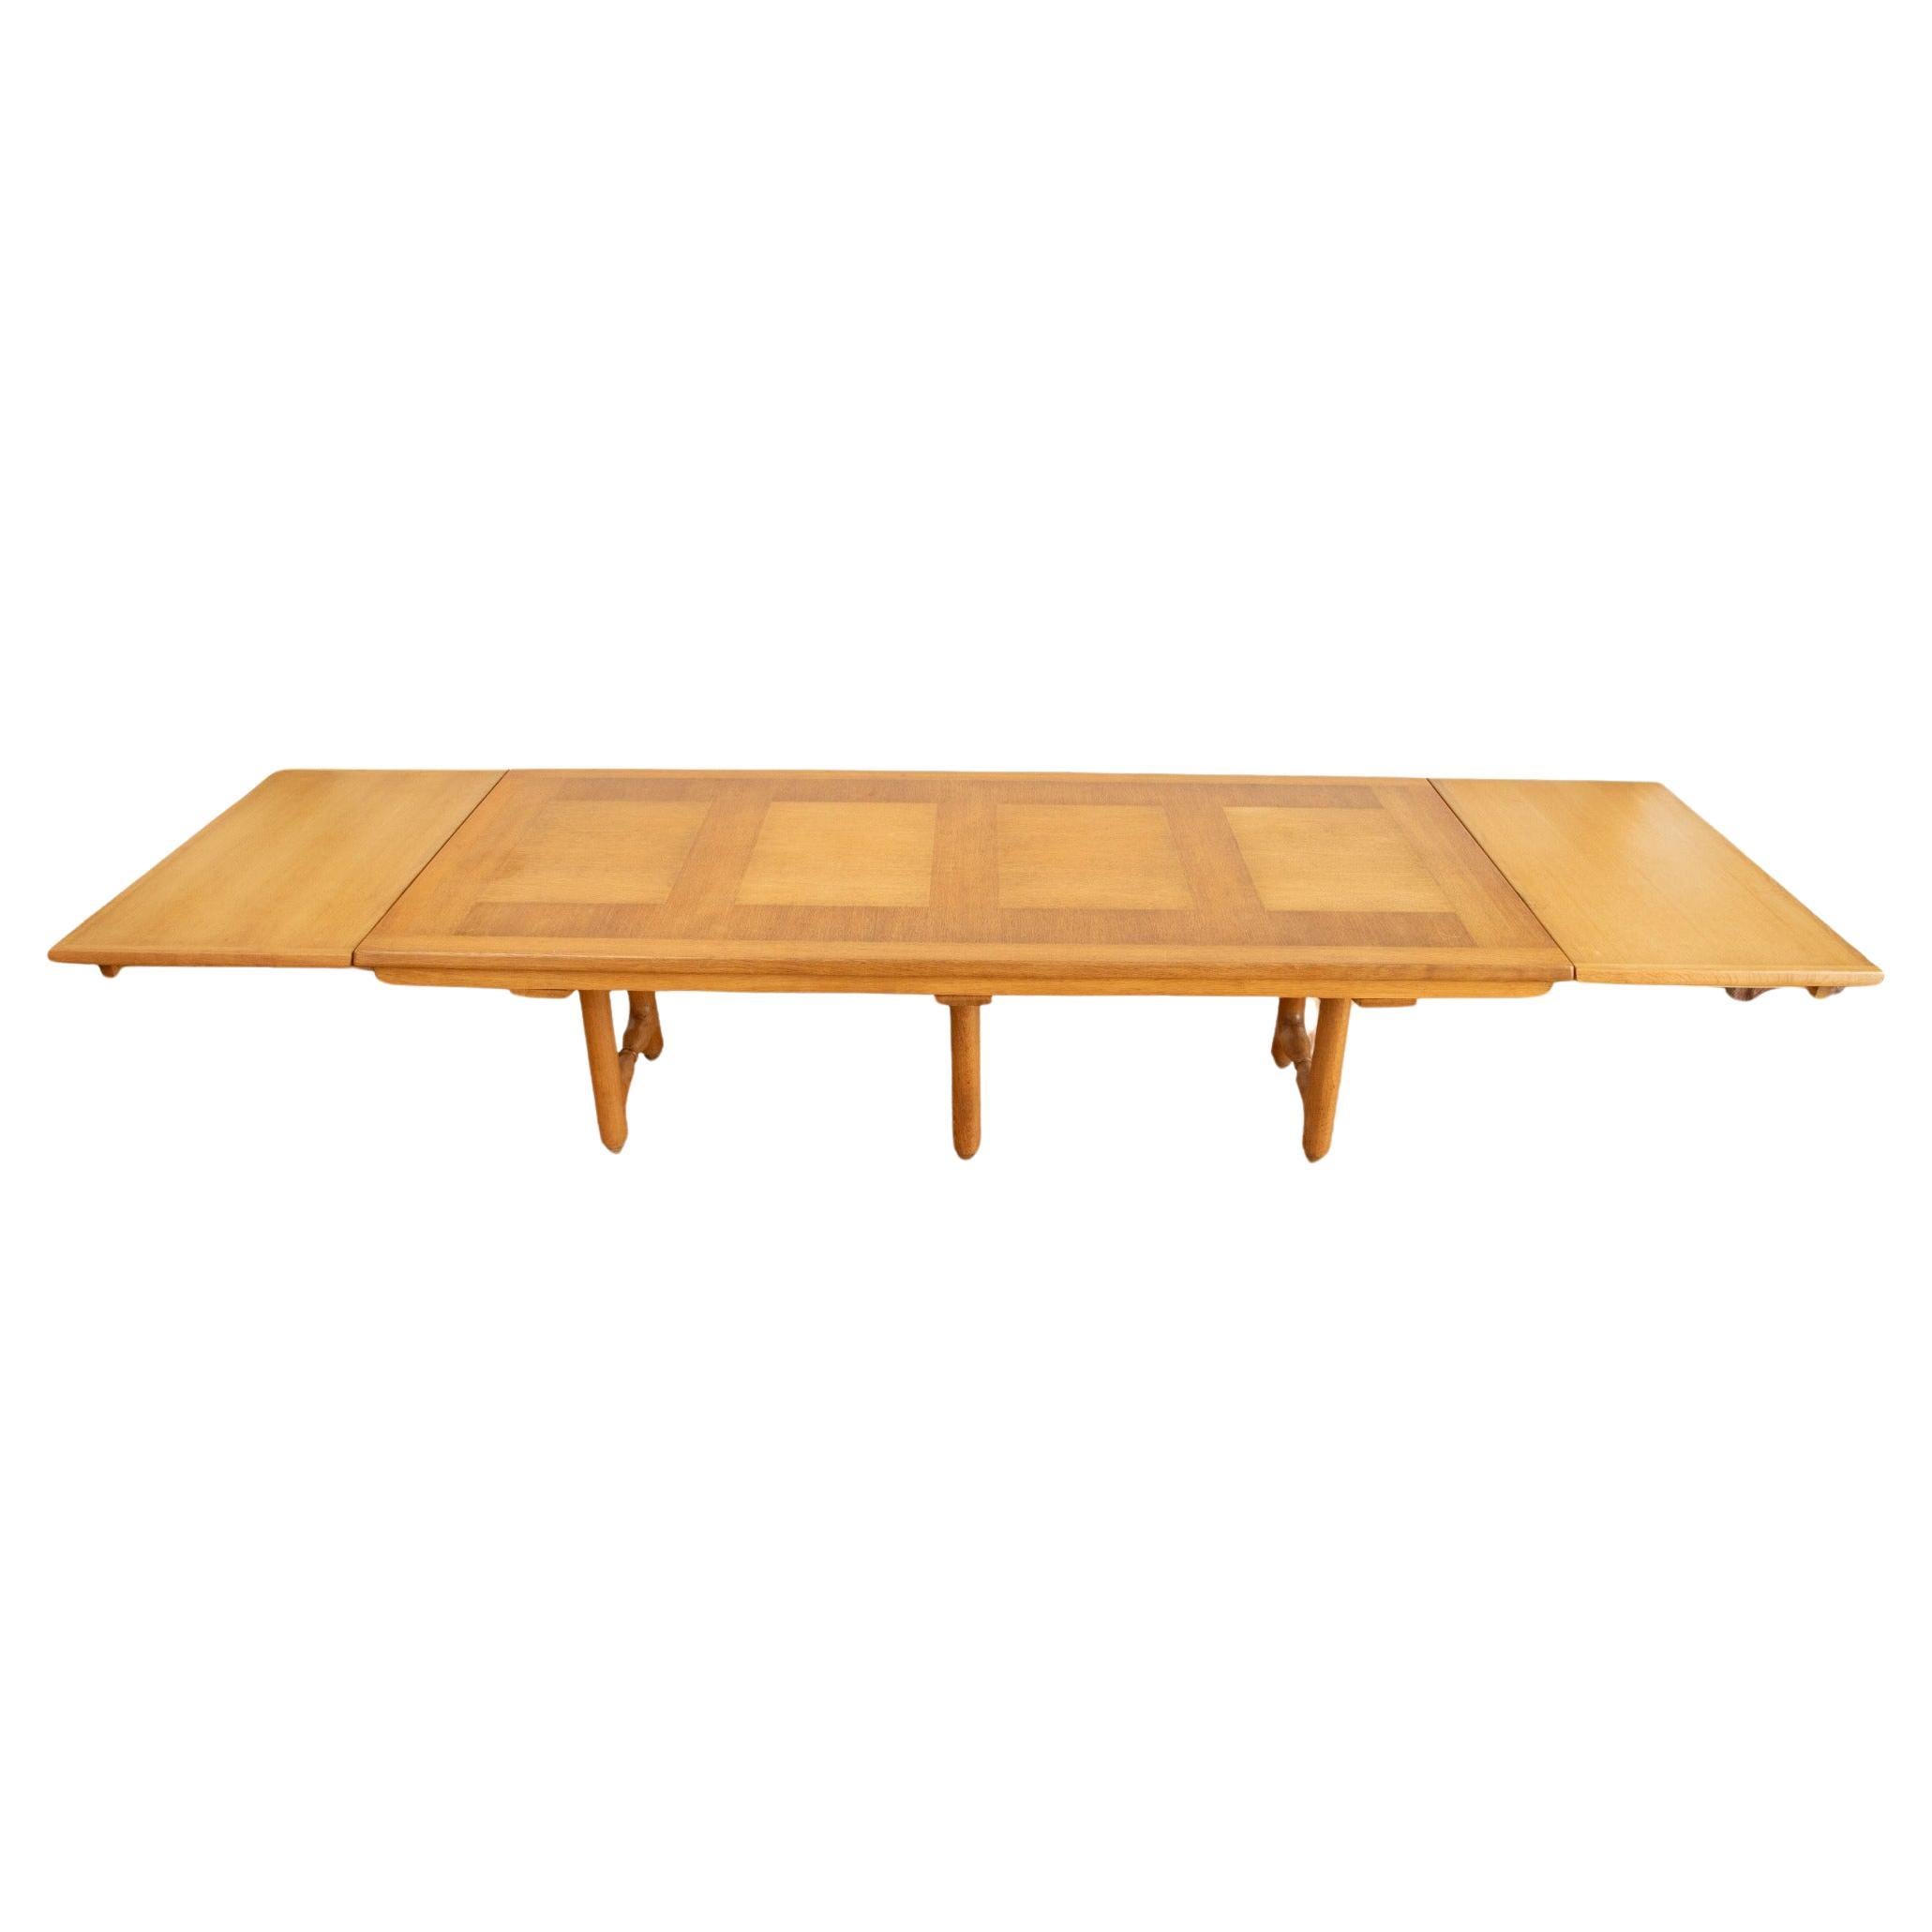 Large oak mid century modern French extending table, by Guillerme and Chambron, France circa 1950/60
Rare hard to come by large dining table, model Gustave, blonde oak extending two leaves inset with smart extension providing extra space on the top,